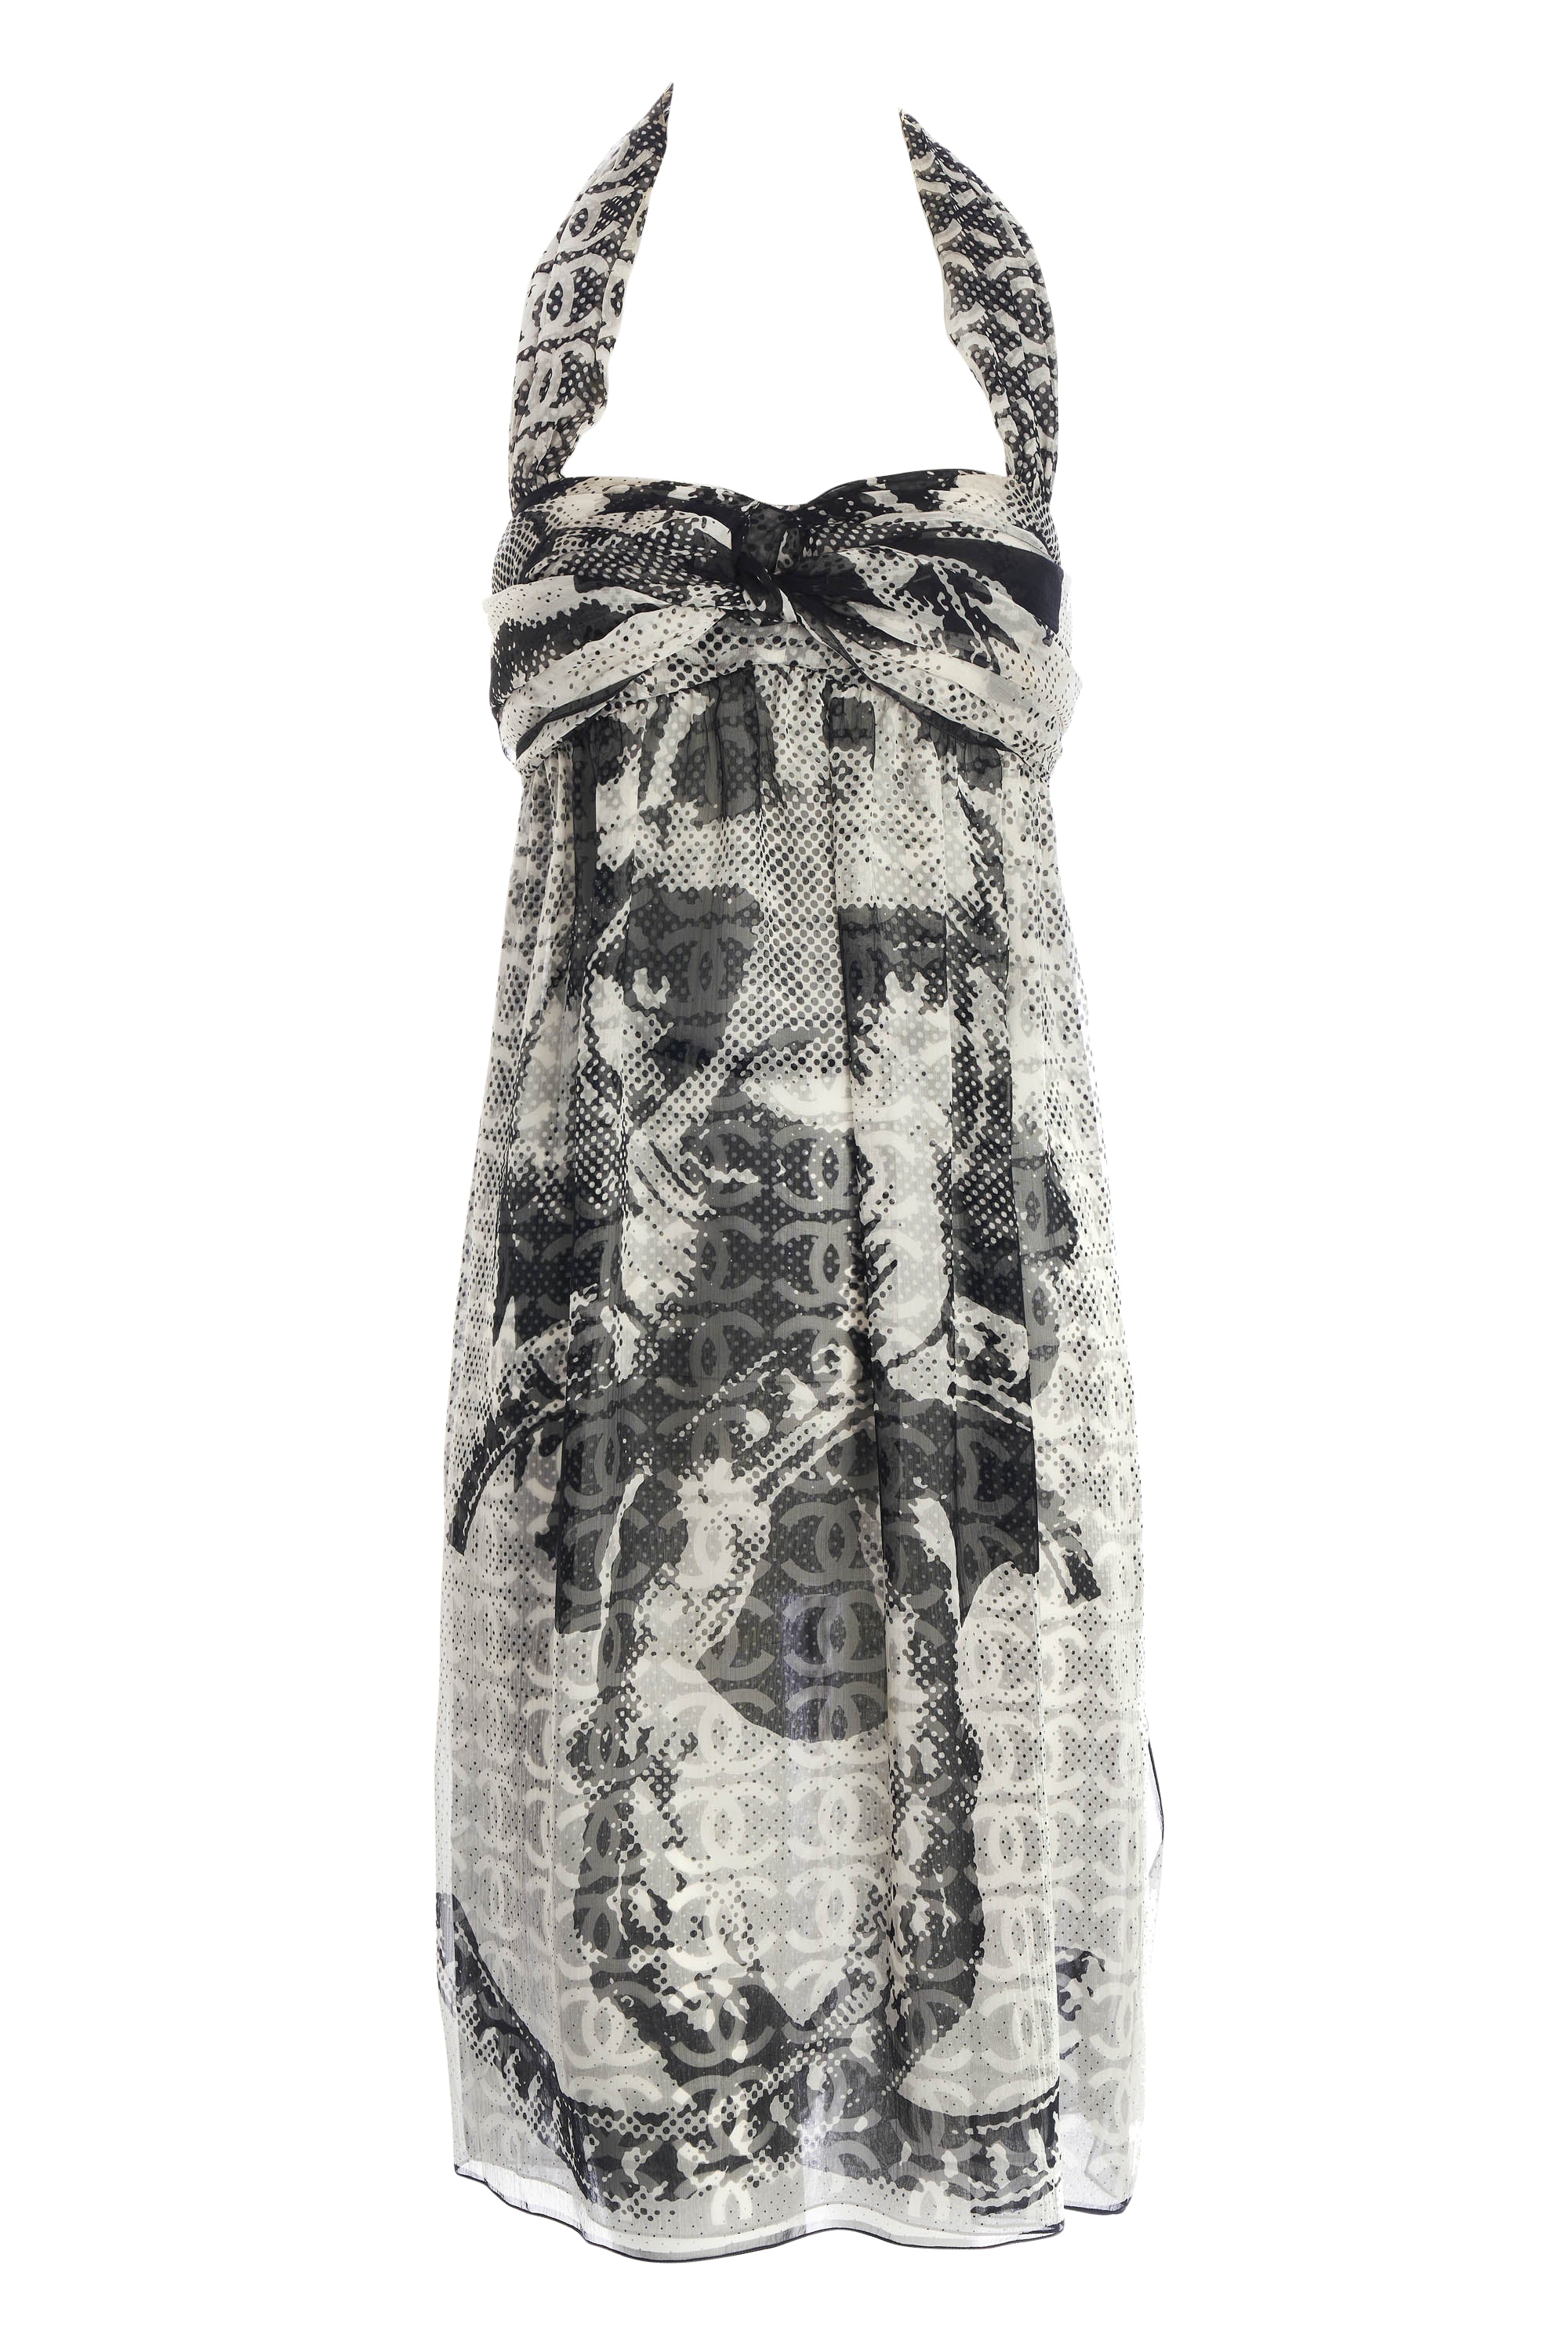 Chanel Printed Black and White Lion Dress 2010C